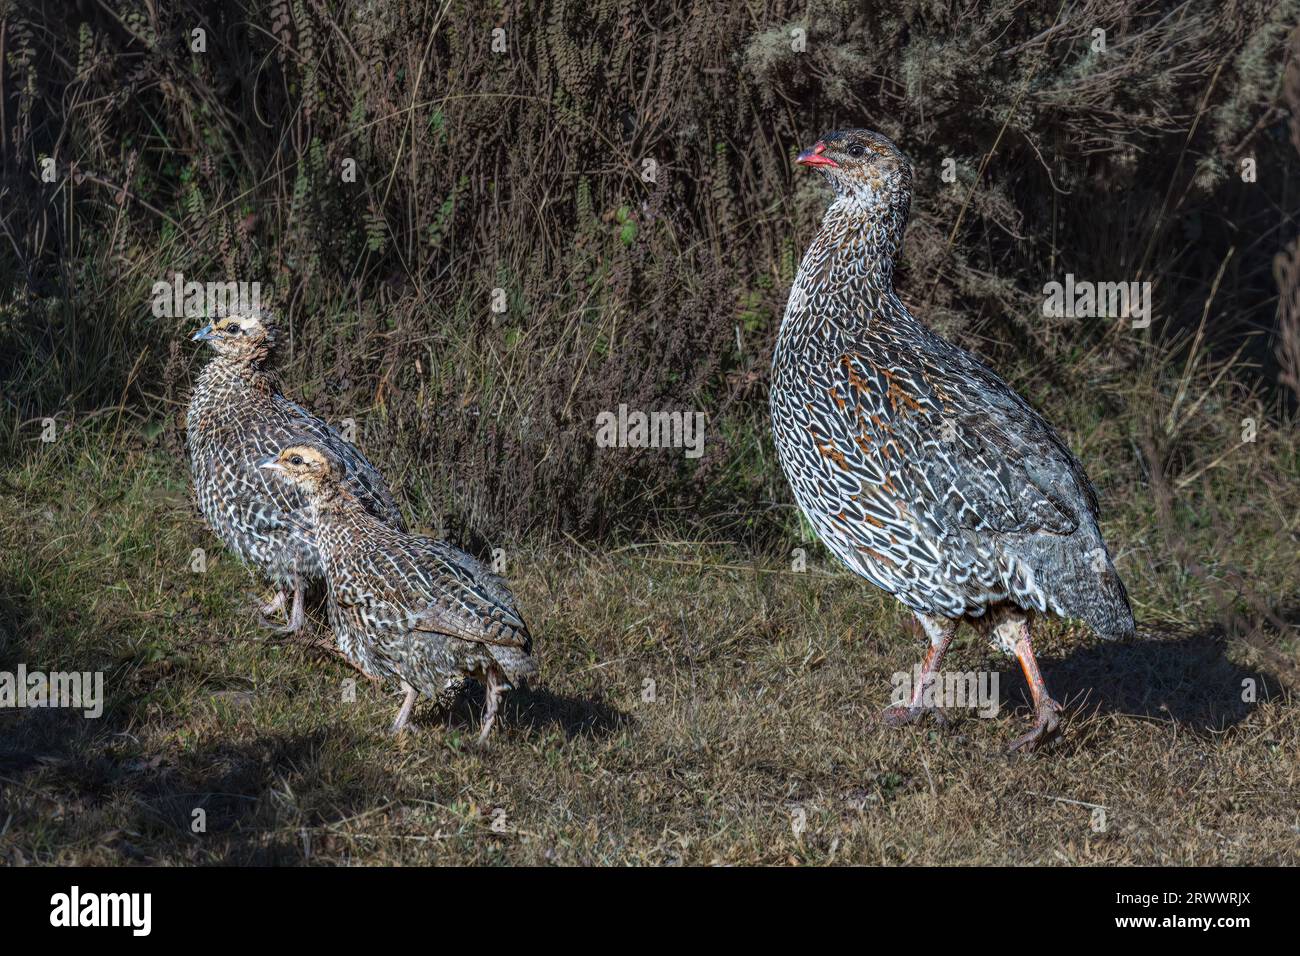 This spurfowl occurs in the mountains of Ethiopia. Stock Photo